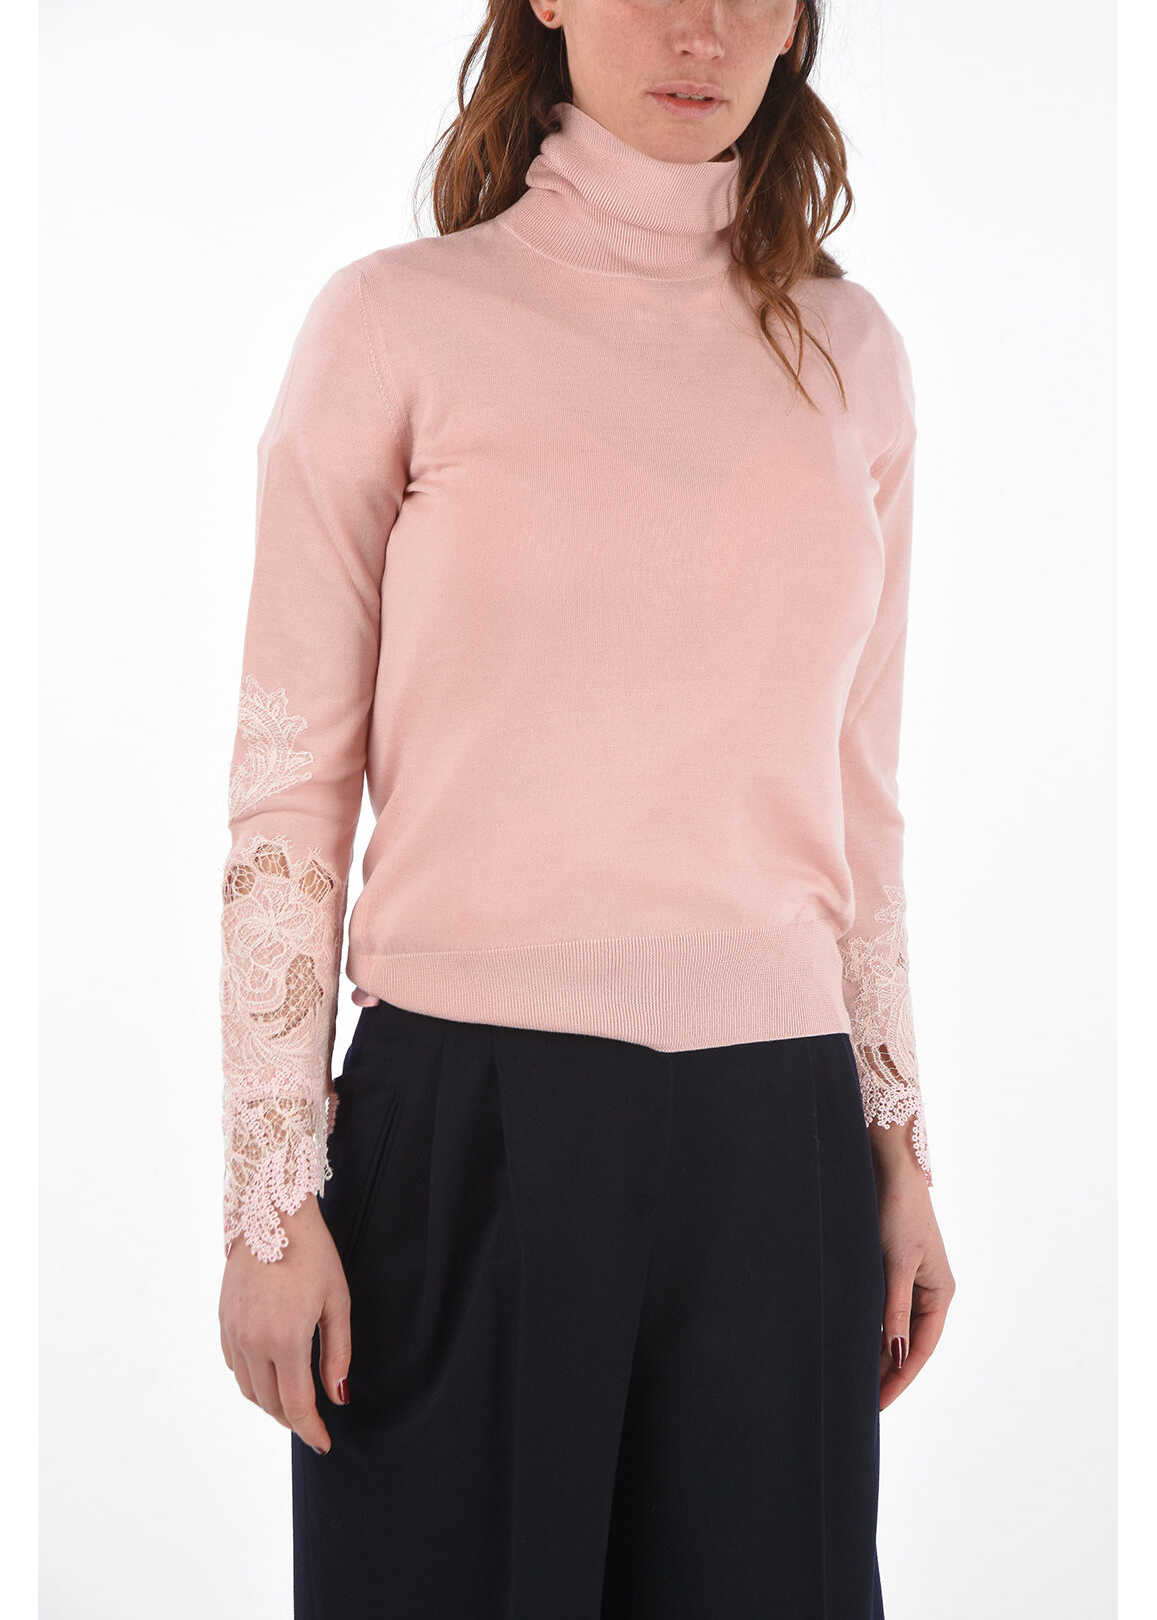 Ermanno Scervino Turtleneck Virgin Wool Sweater With Lace Details Pink image0